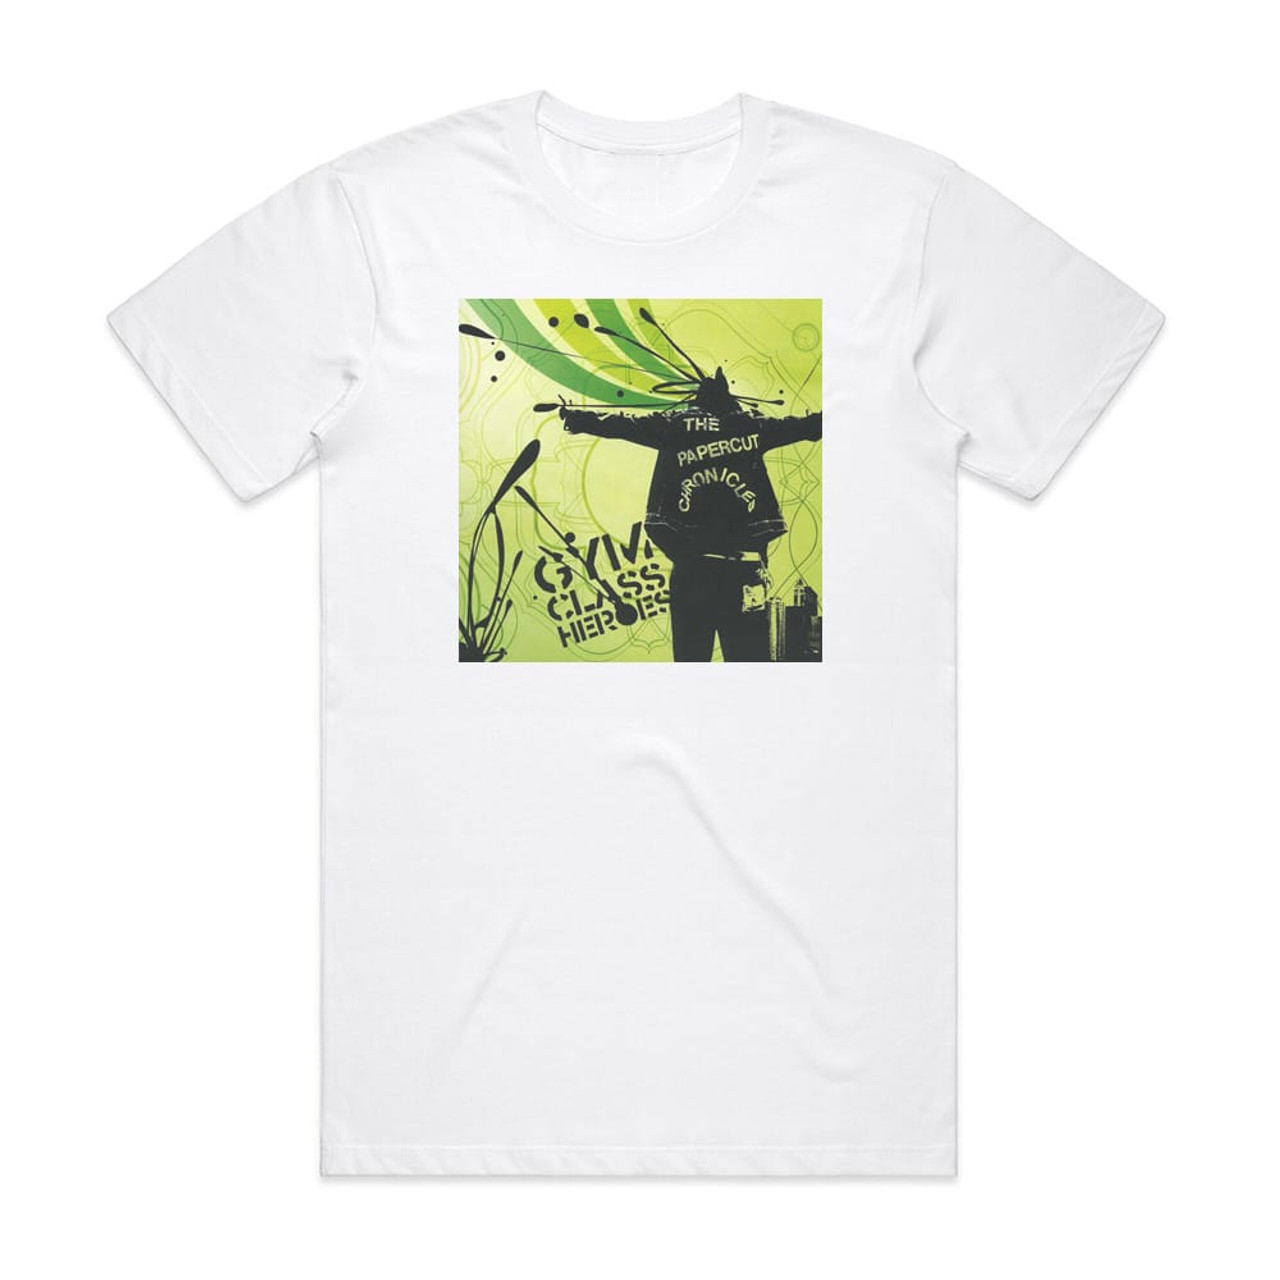 Gym Class Heroes The Papercut Chronicles Album Cover T-Shirt White